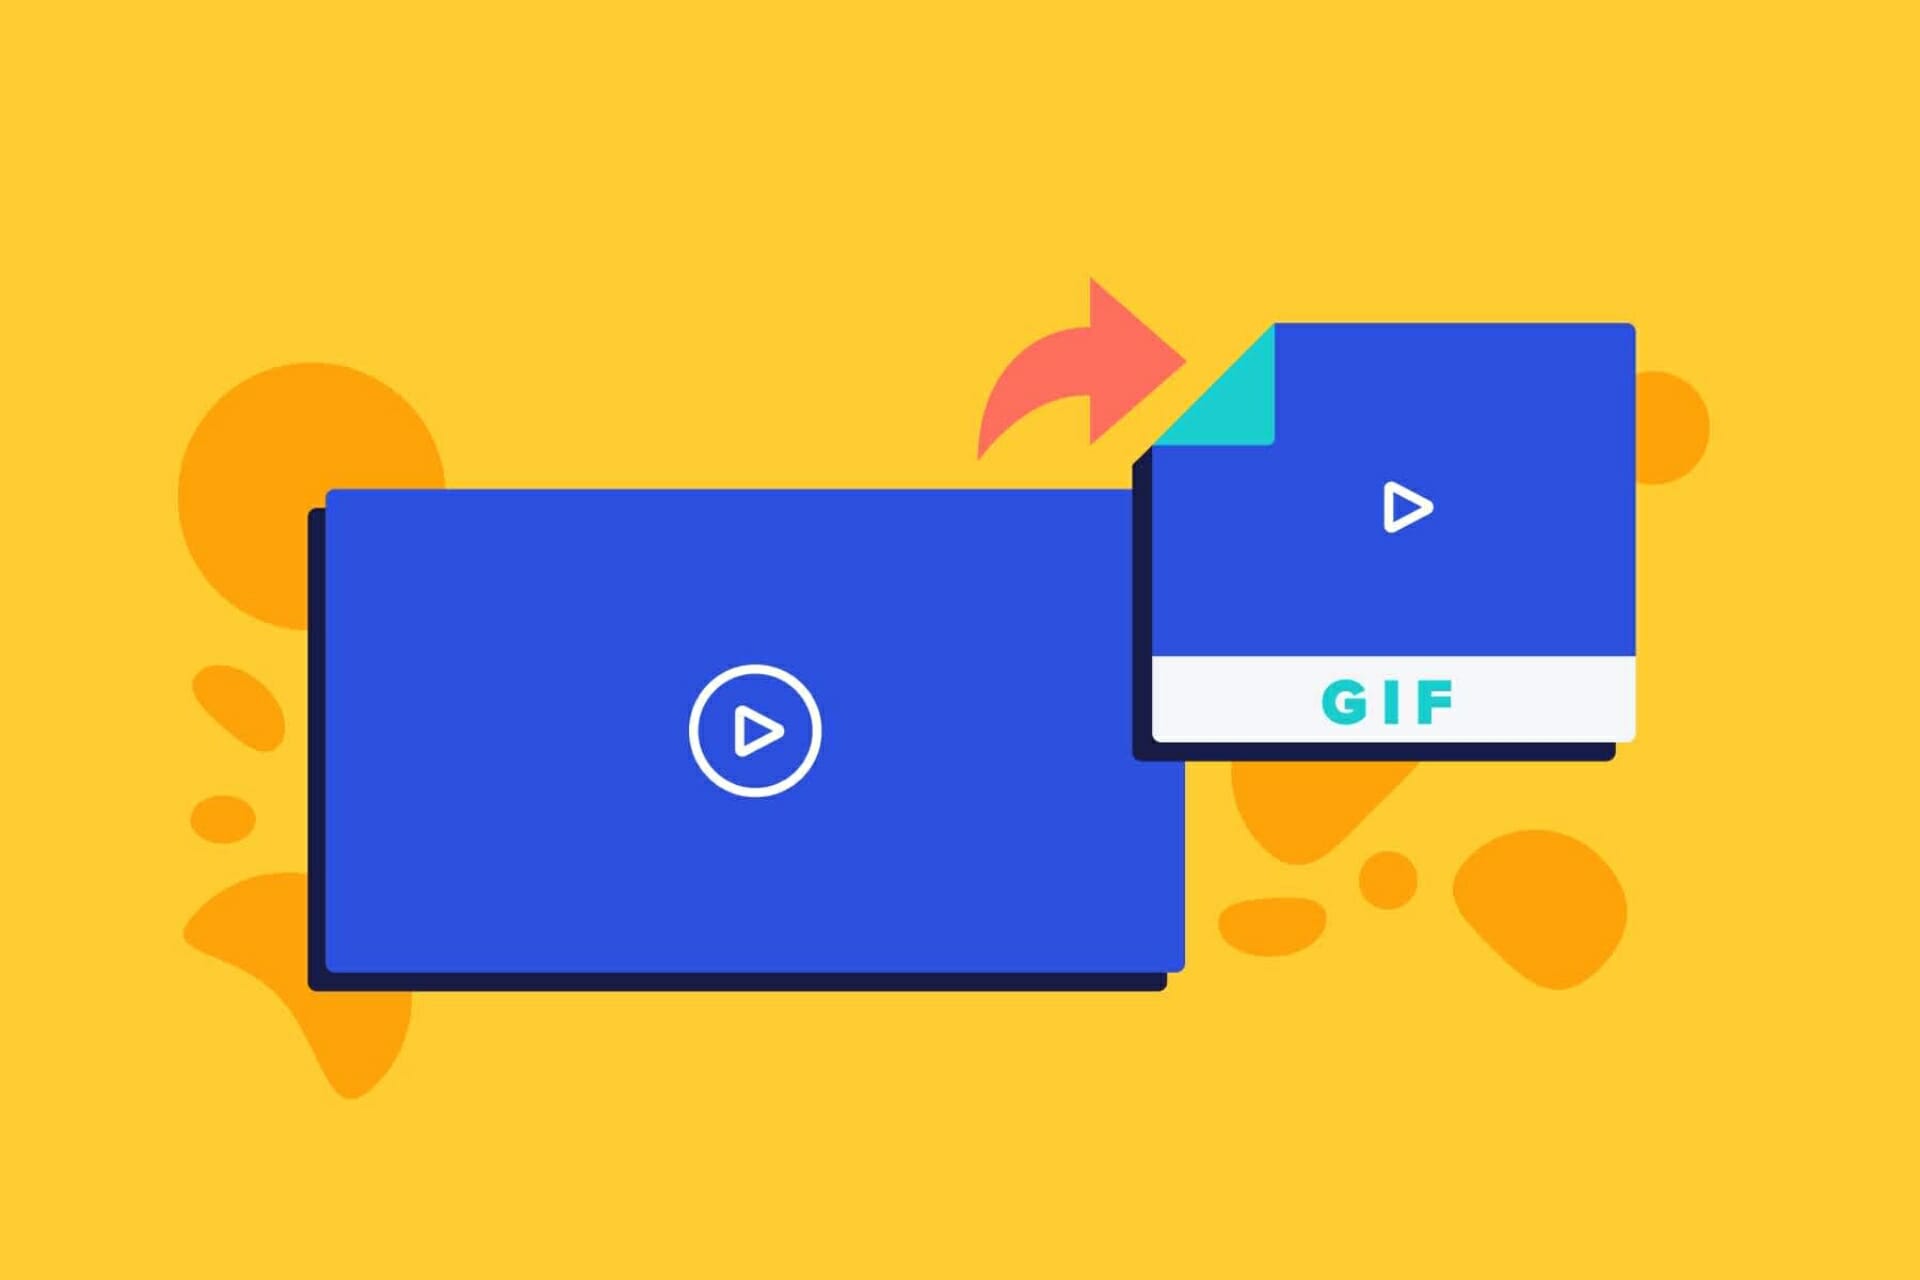 How to create Animated GIFs on Windows with static images - H2S Media